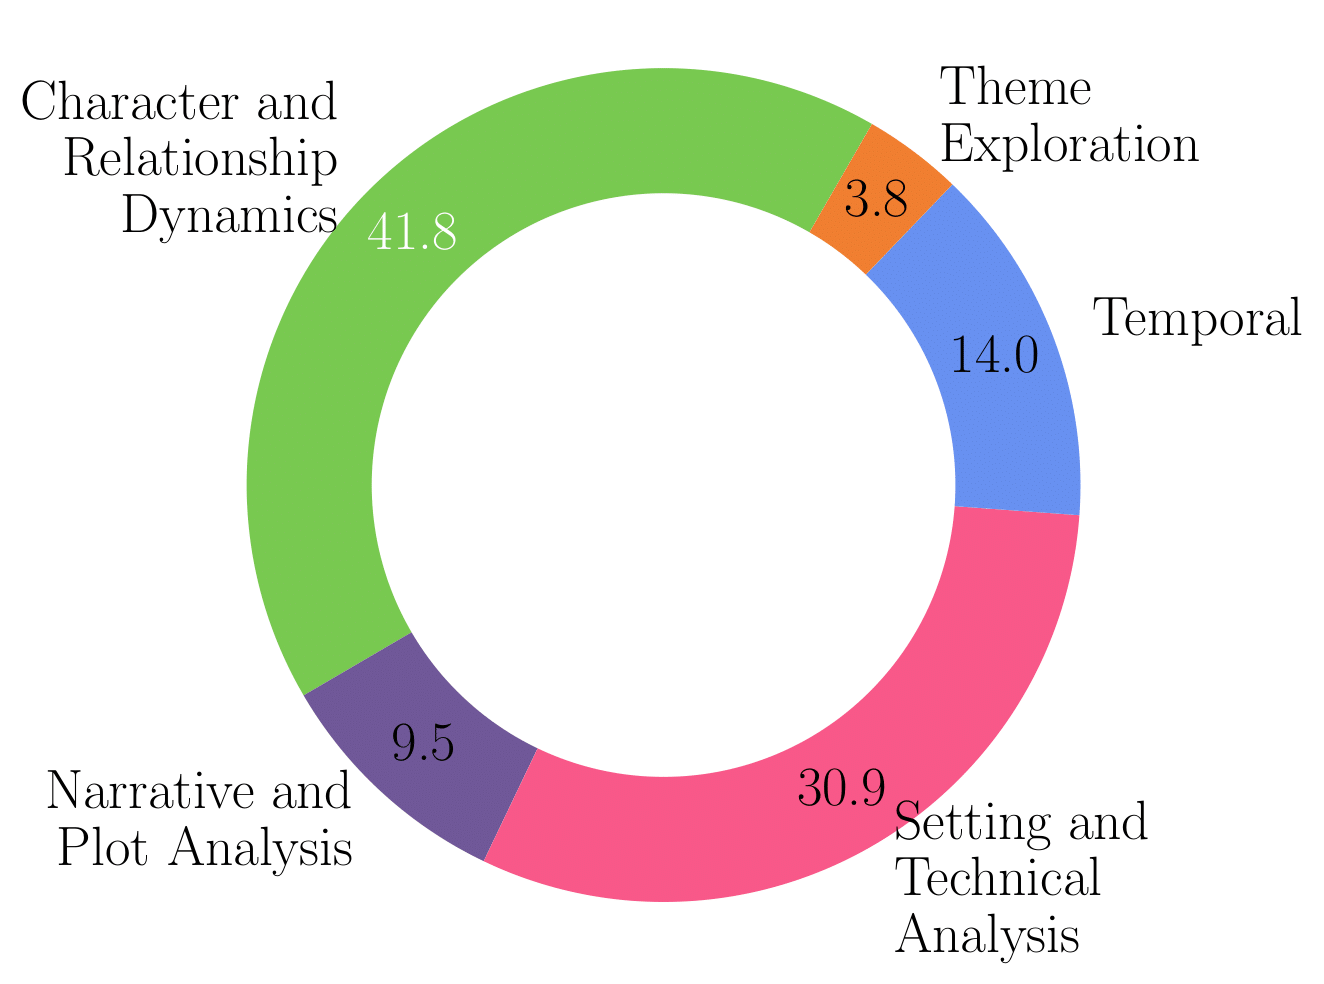 Distribution of Question Themes